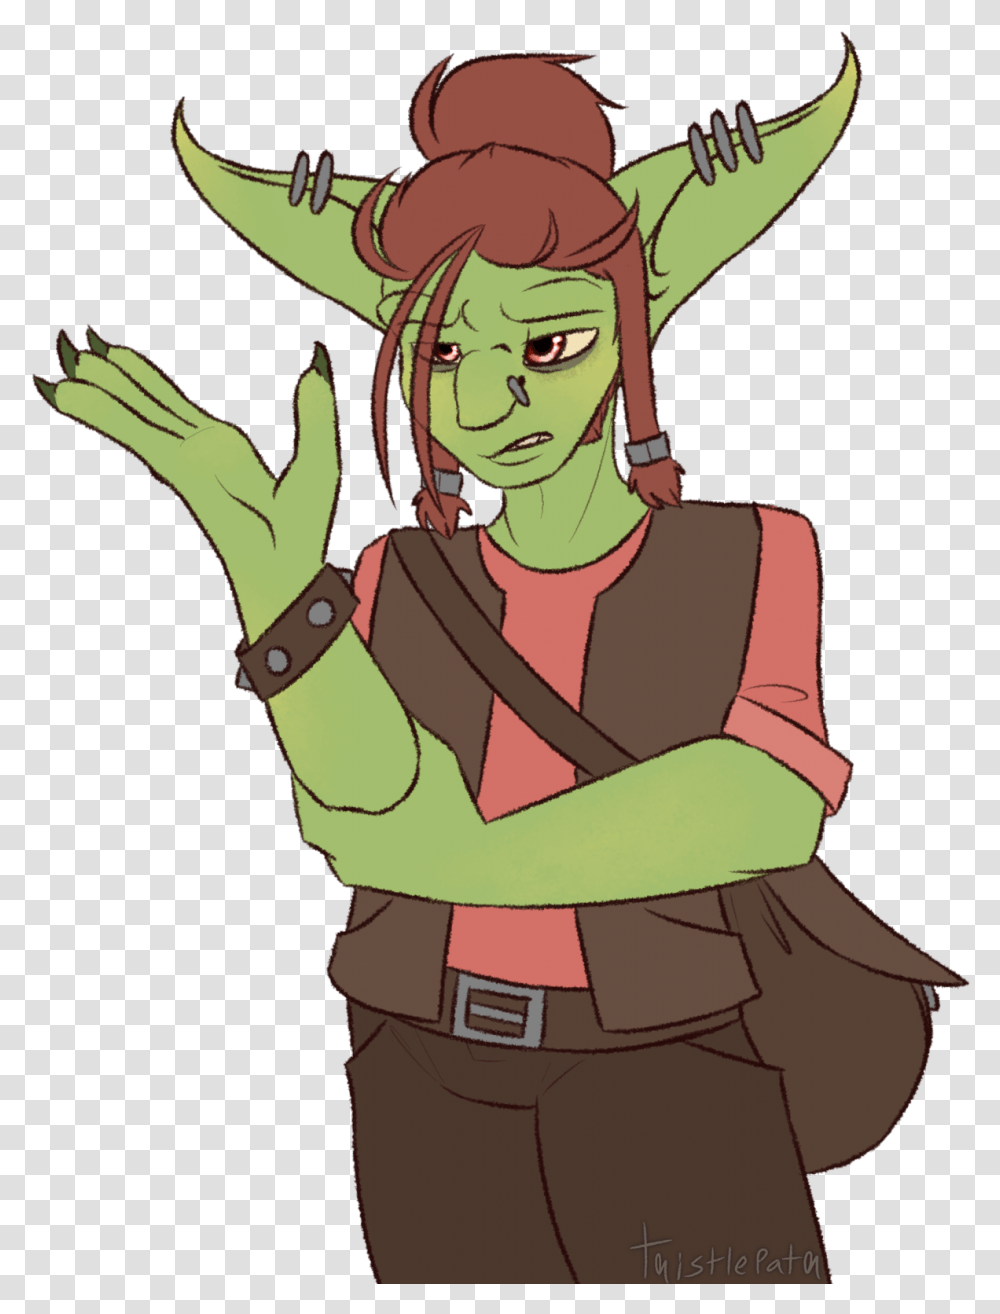 One Of My World Of Warcraft Characters His Name Is Cartoon, Person, Human, Plant, Comics Transparent Png